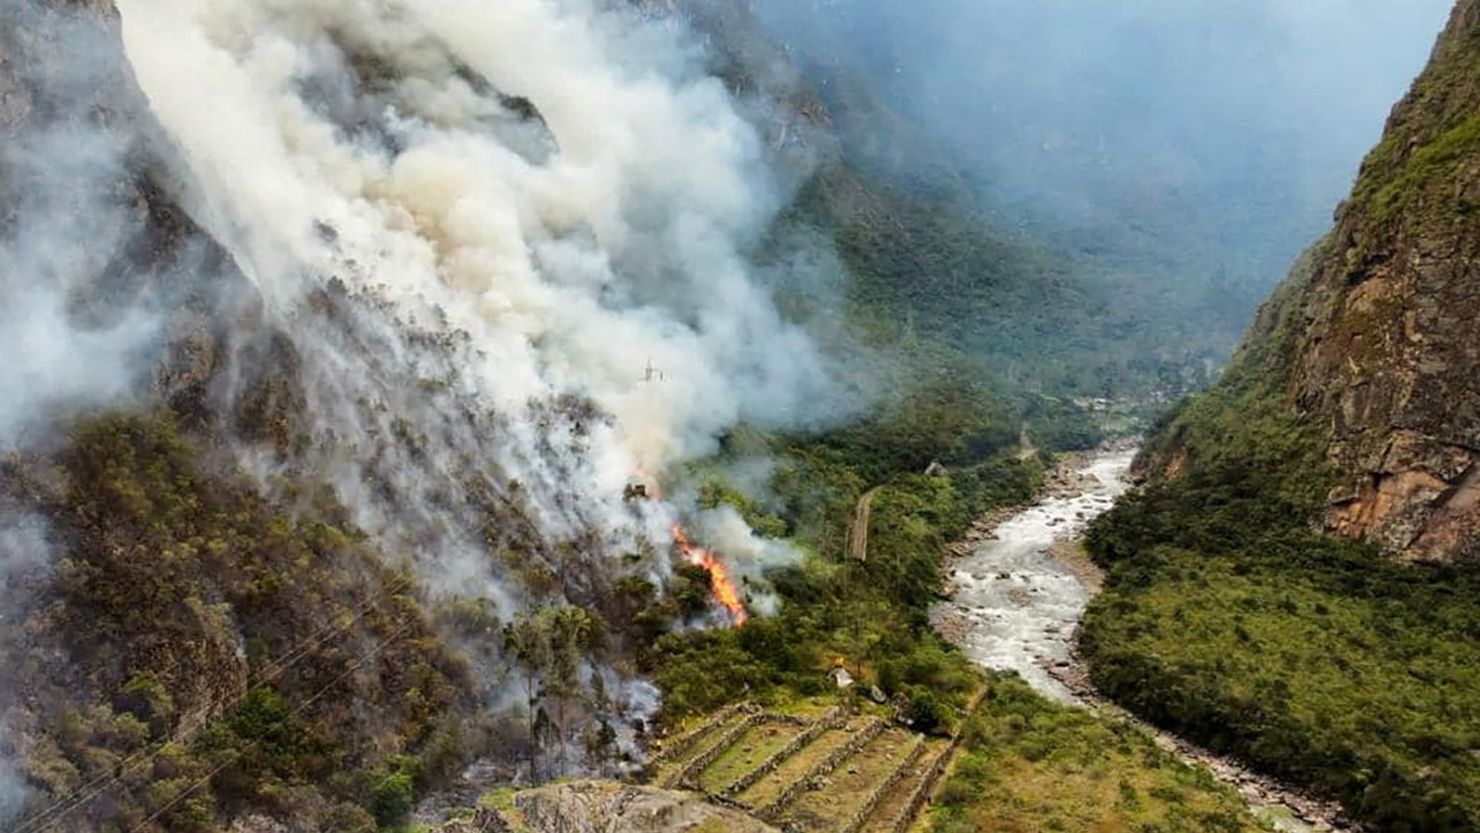 A forest fire burns in Machu Picchu, Peru, in this image released on June 29, 2022. Ministry of Culture of Peru/Handout via REUTERS    THIS IMAGE HAS BEEN SUPPLIED BY A THIRD PARTY. NO RESALES. NO ARCHIVES. MANDATORY CREDIT.